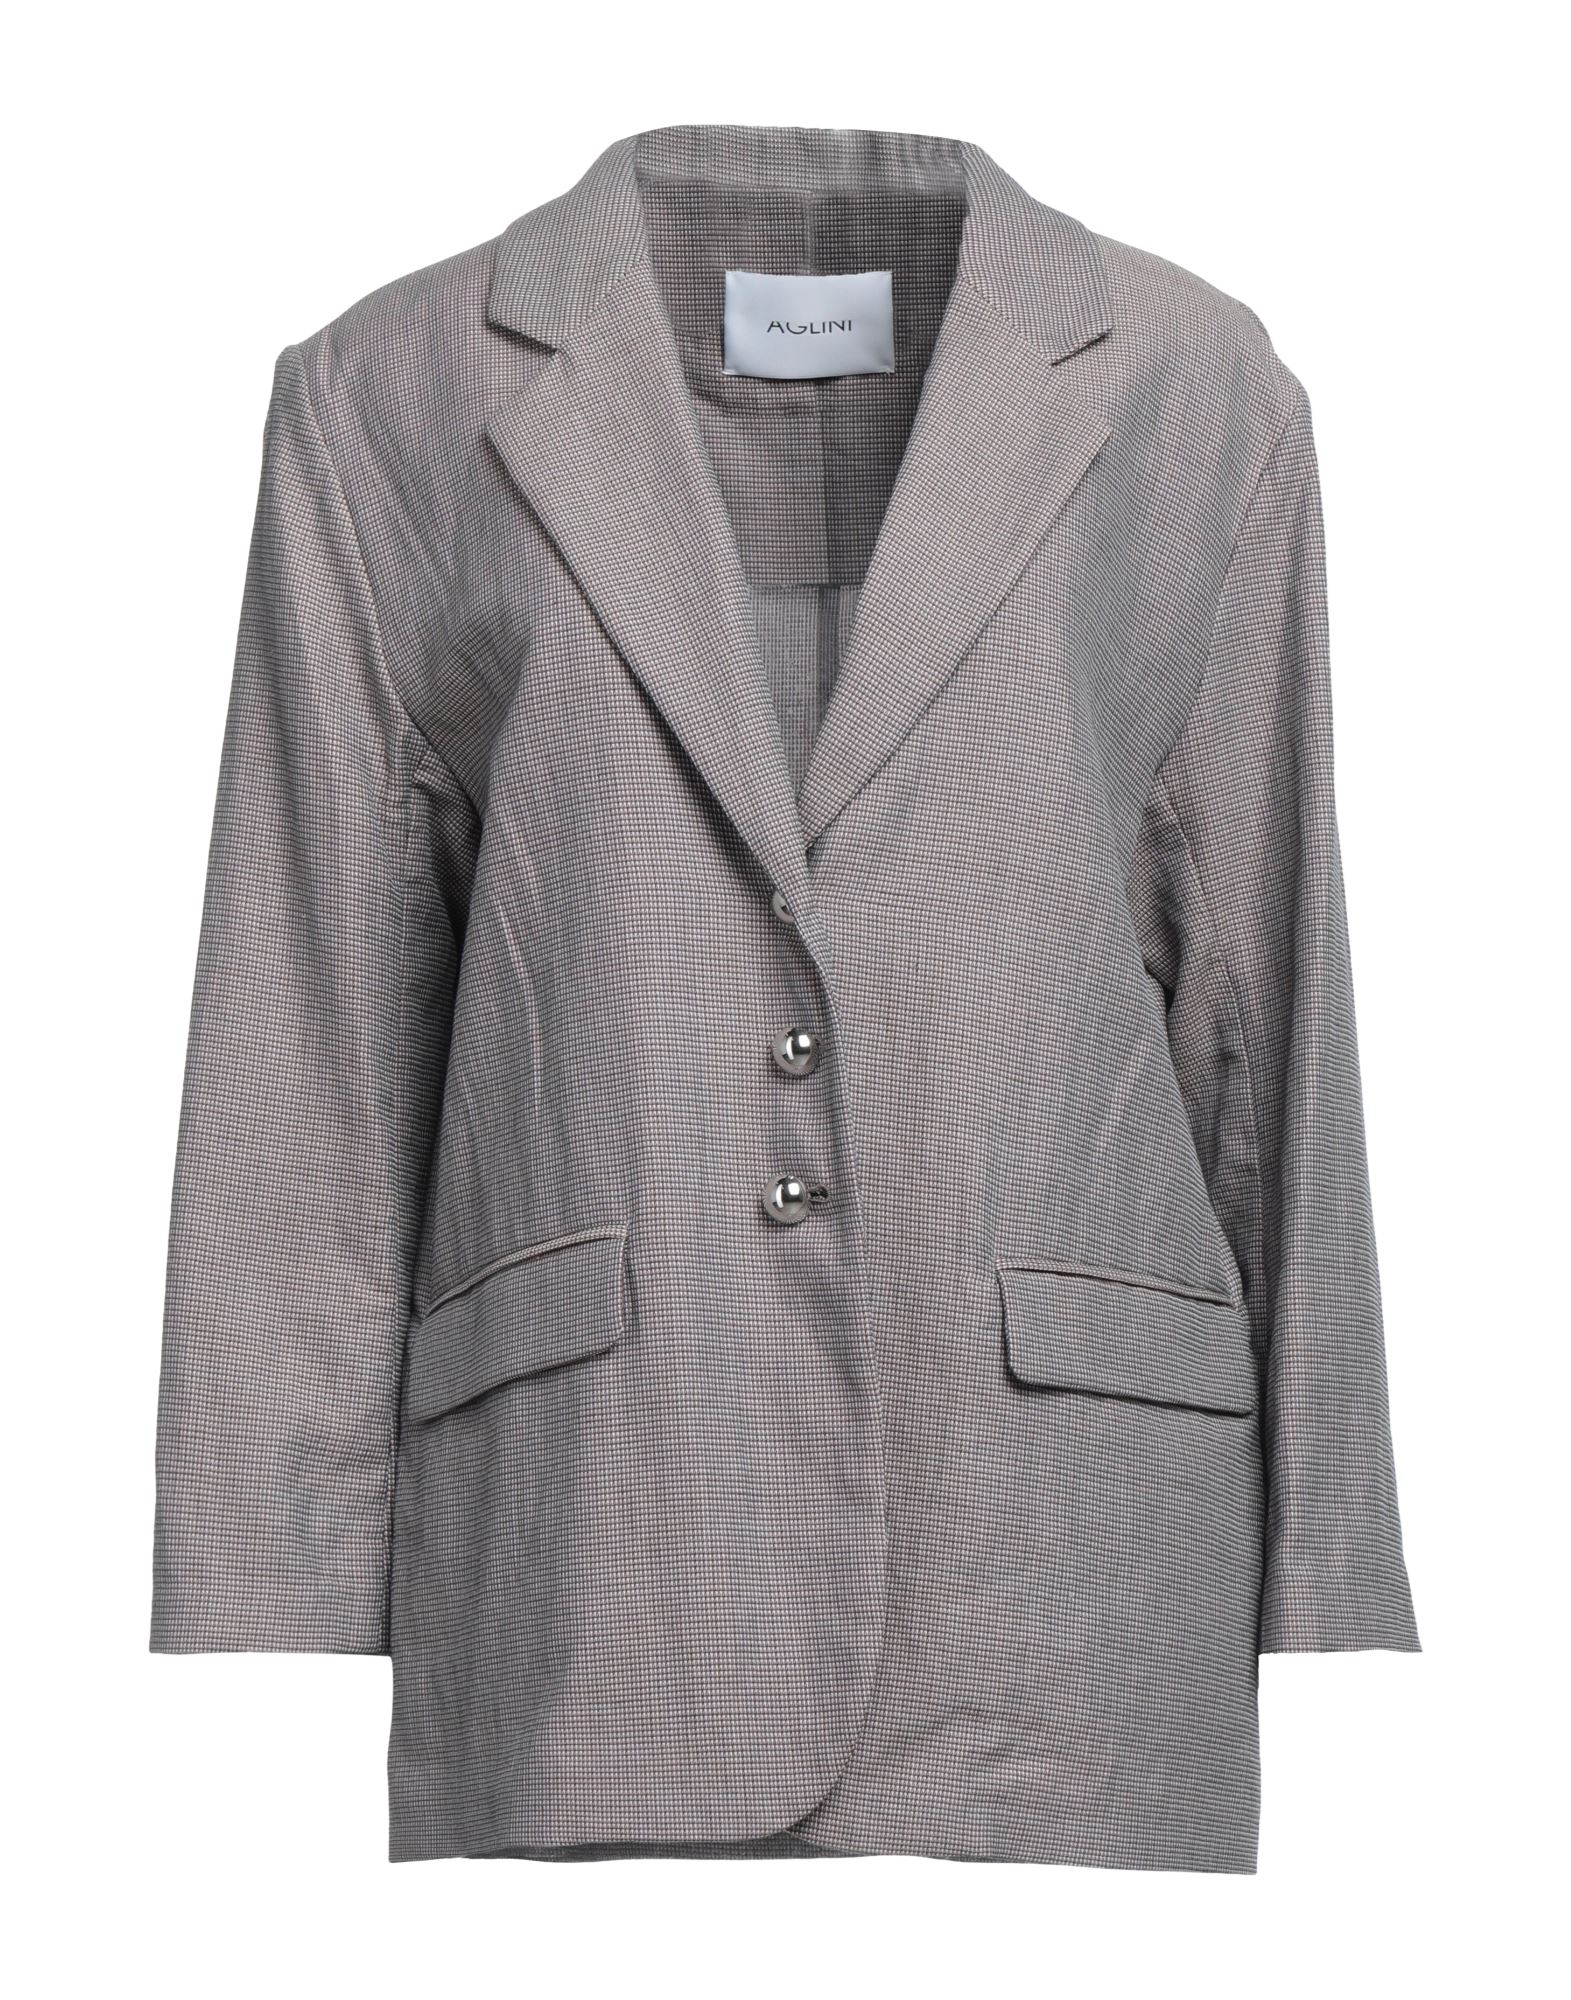 Aglini Suit Jackets In White